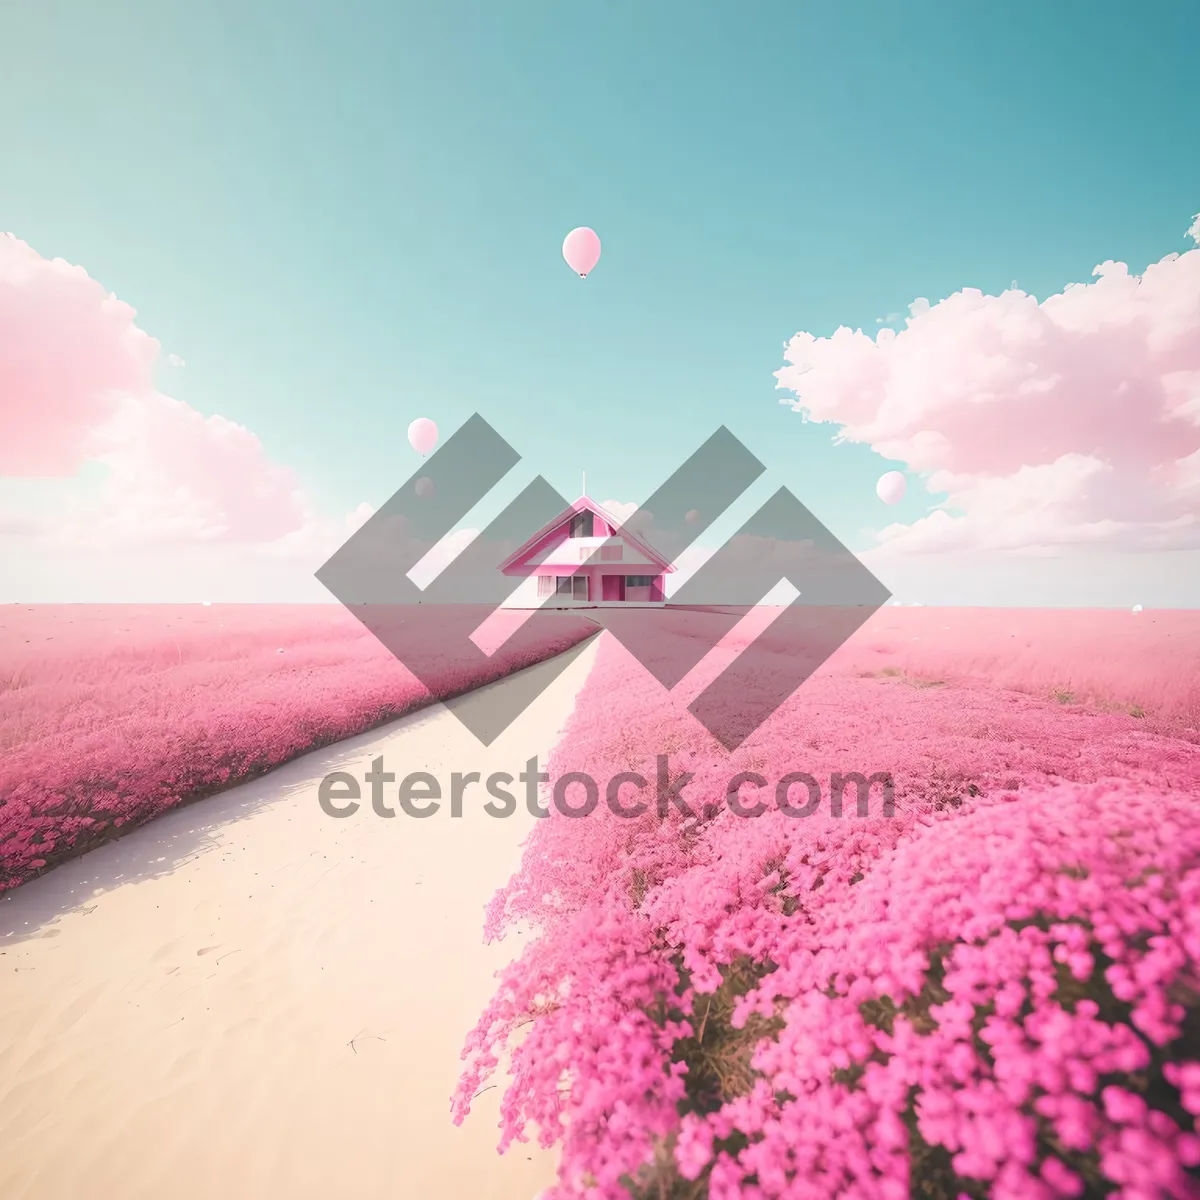 Picture of Colorful Spring Landscape with Pink Phlox Blooming